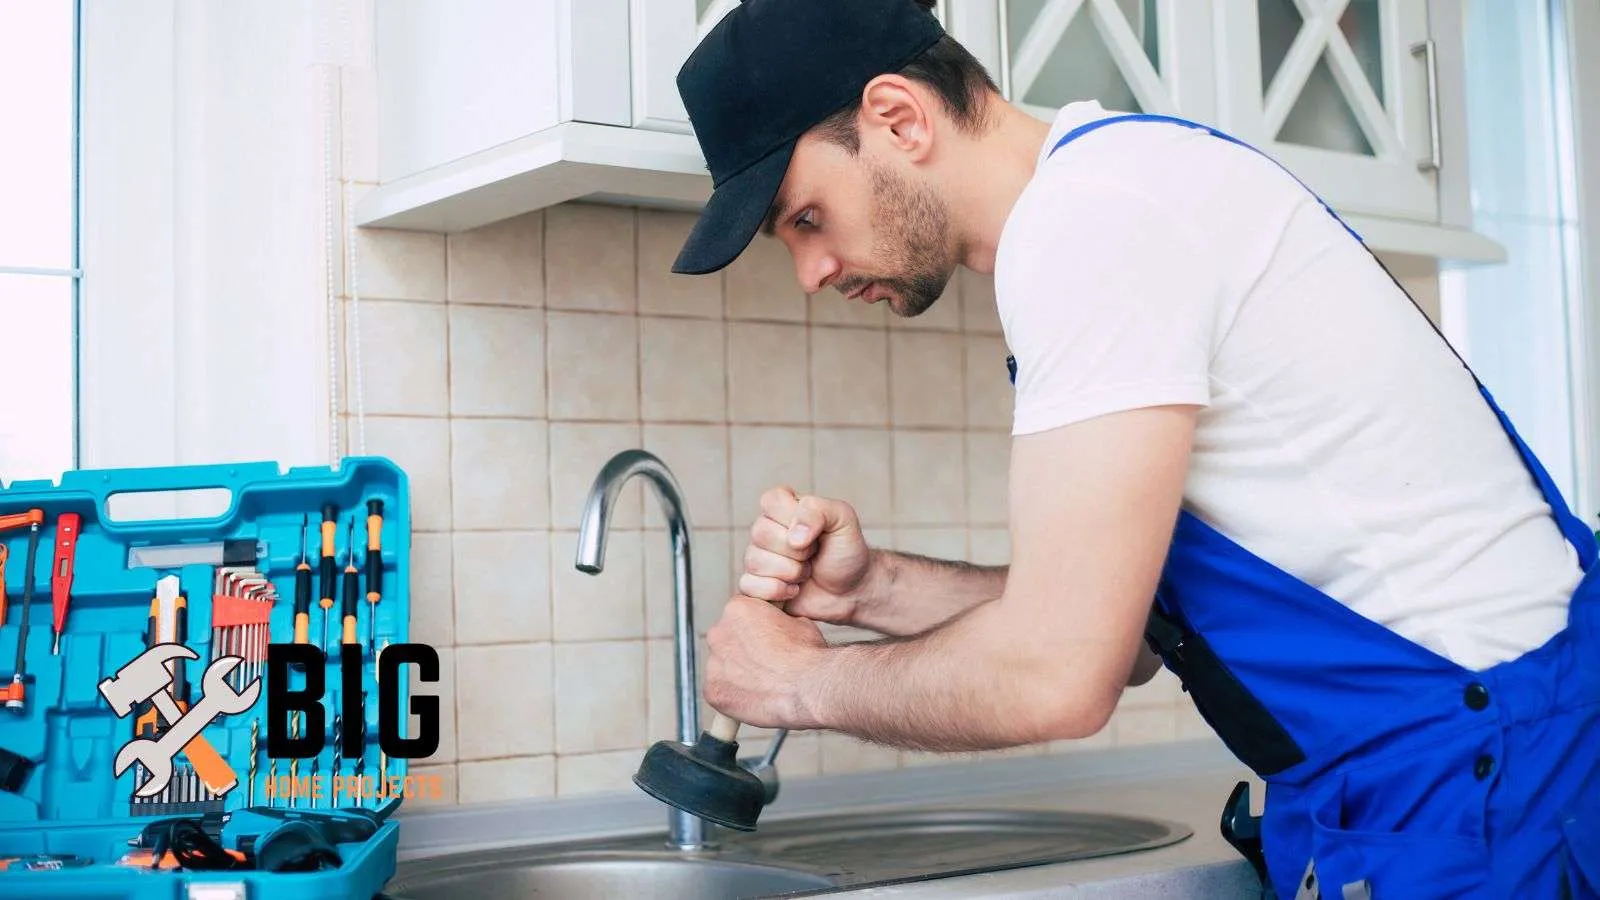 Plumber unclogging a drain - bighomeprojects.com